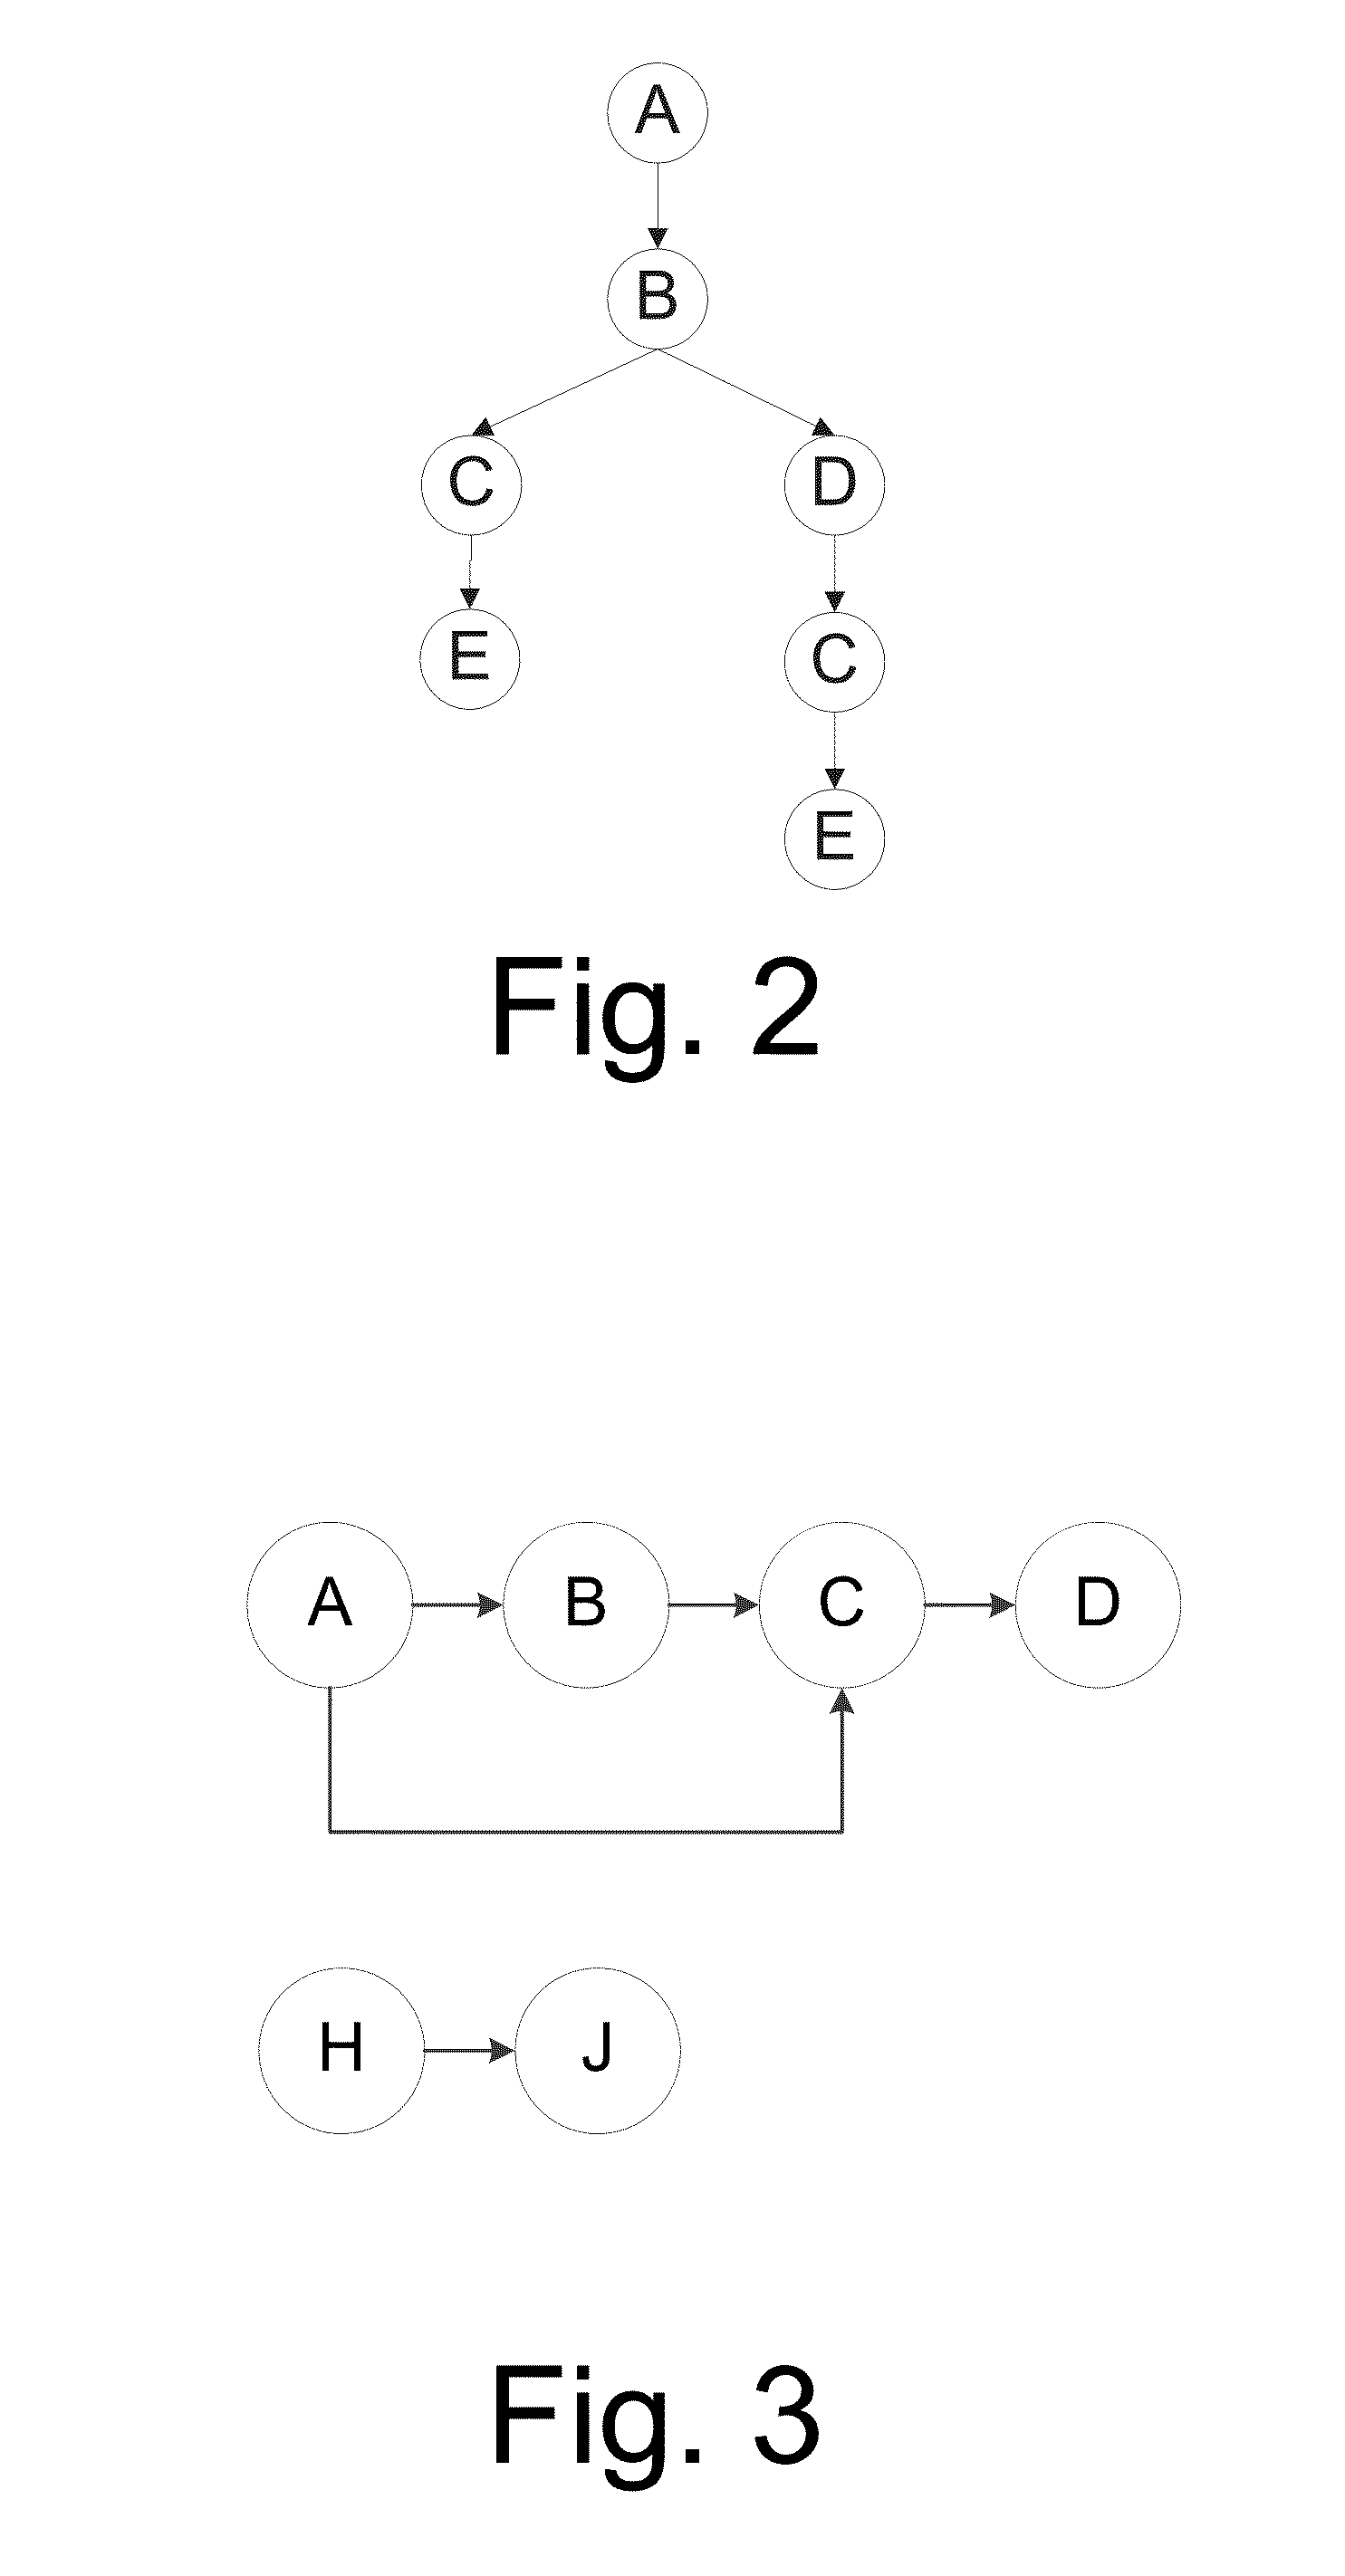 Method and system for extracting user behavior features to personalize recommendations